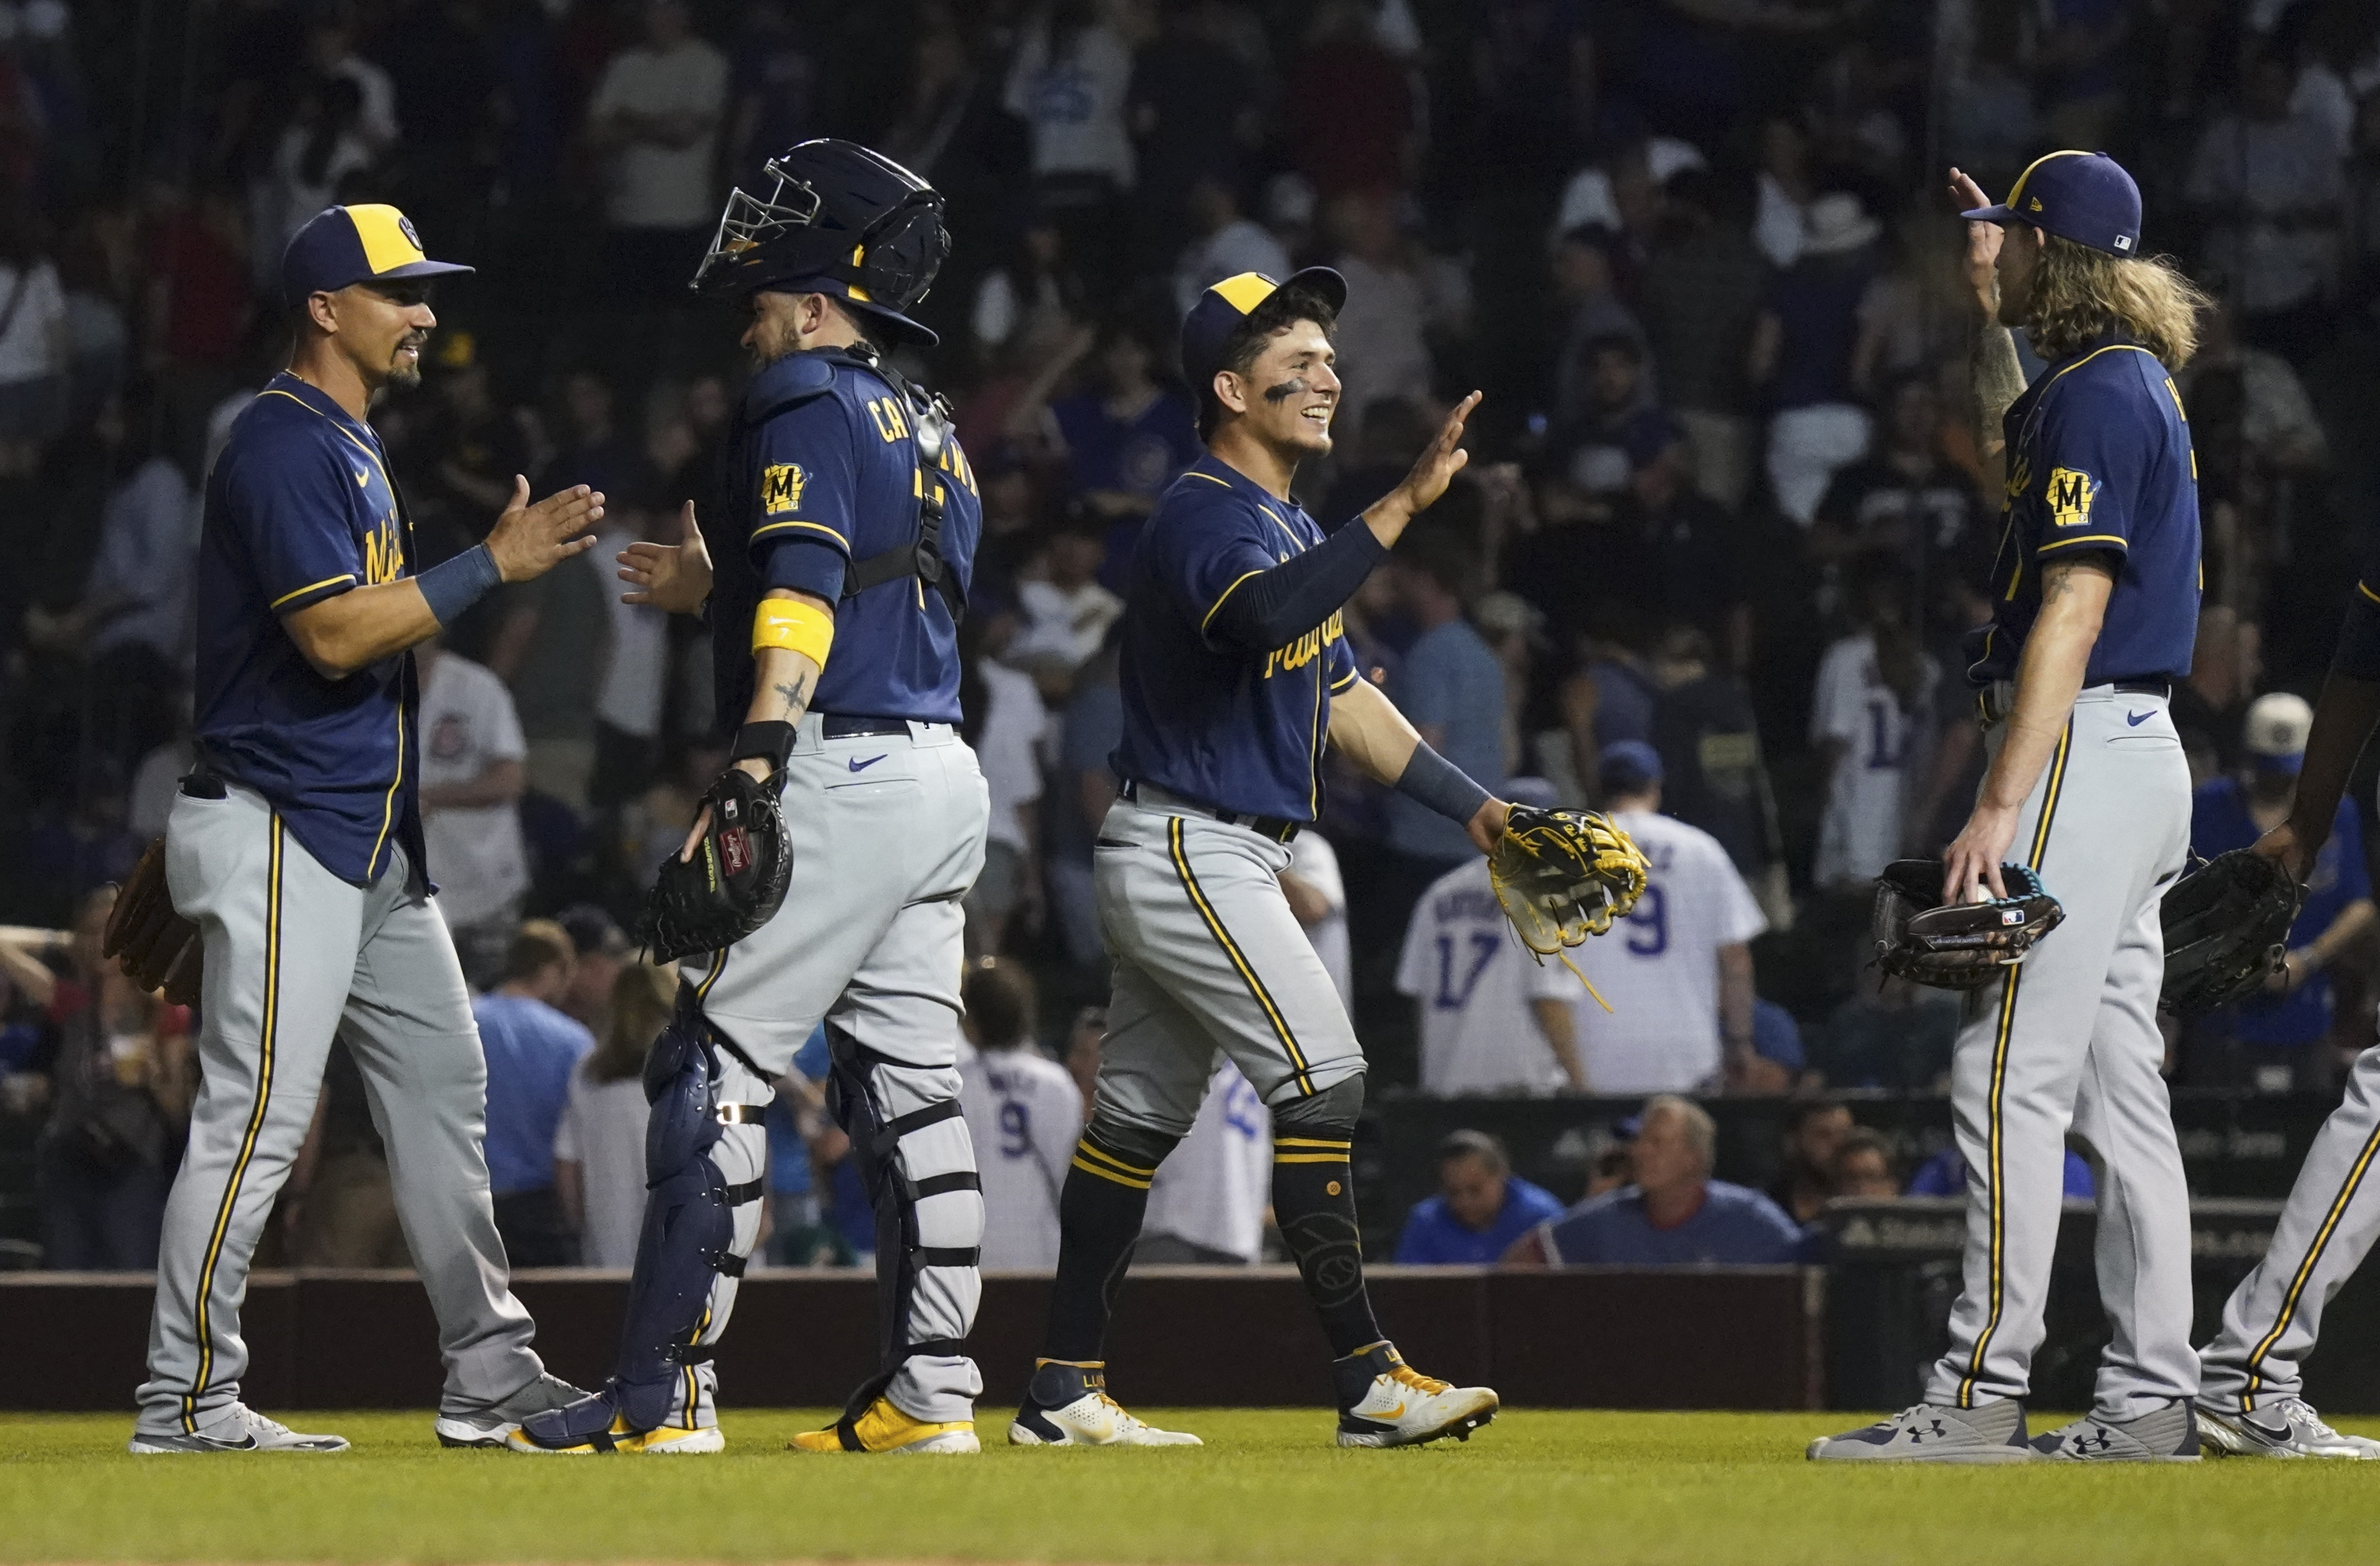 Luis Urias' offense drives Brewers past Twins